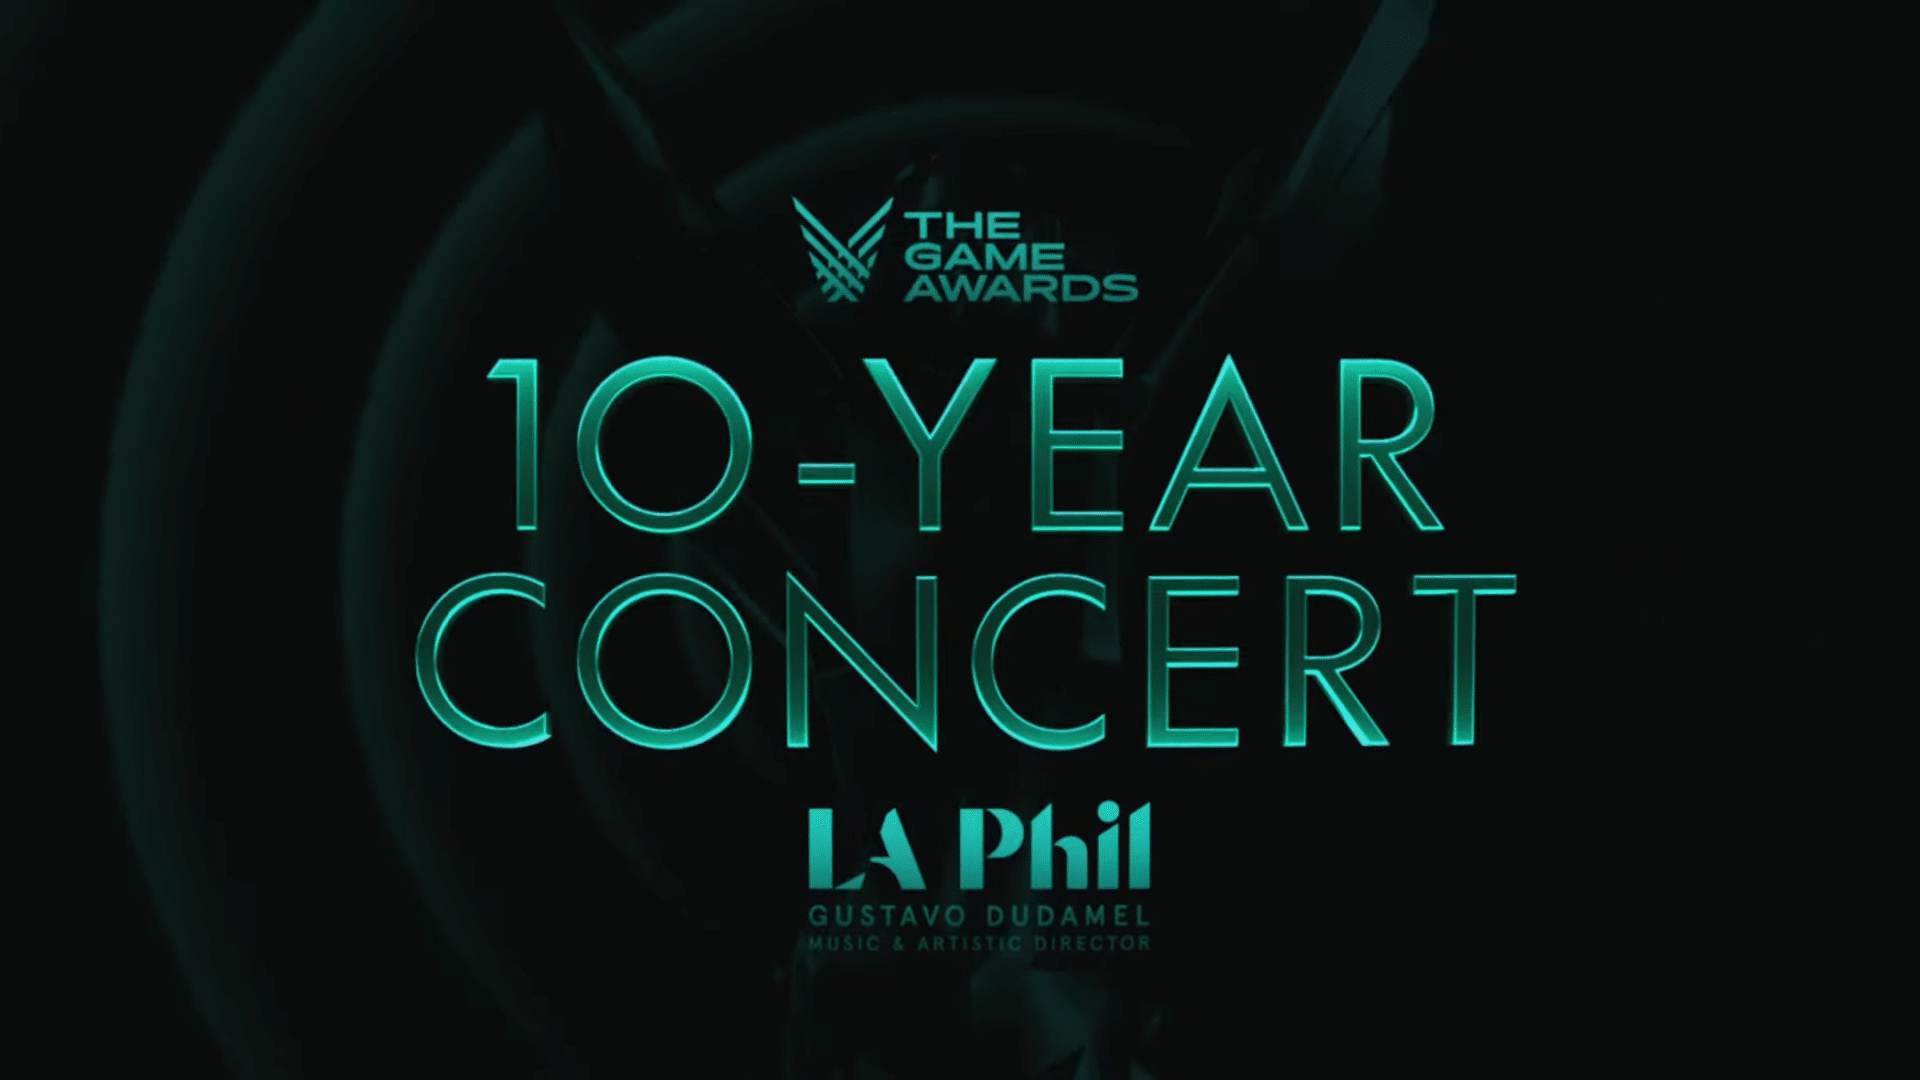 the game awards 10 year concert lineup